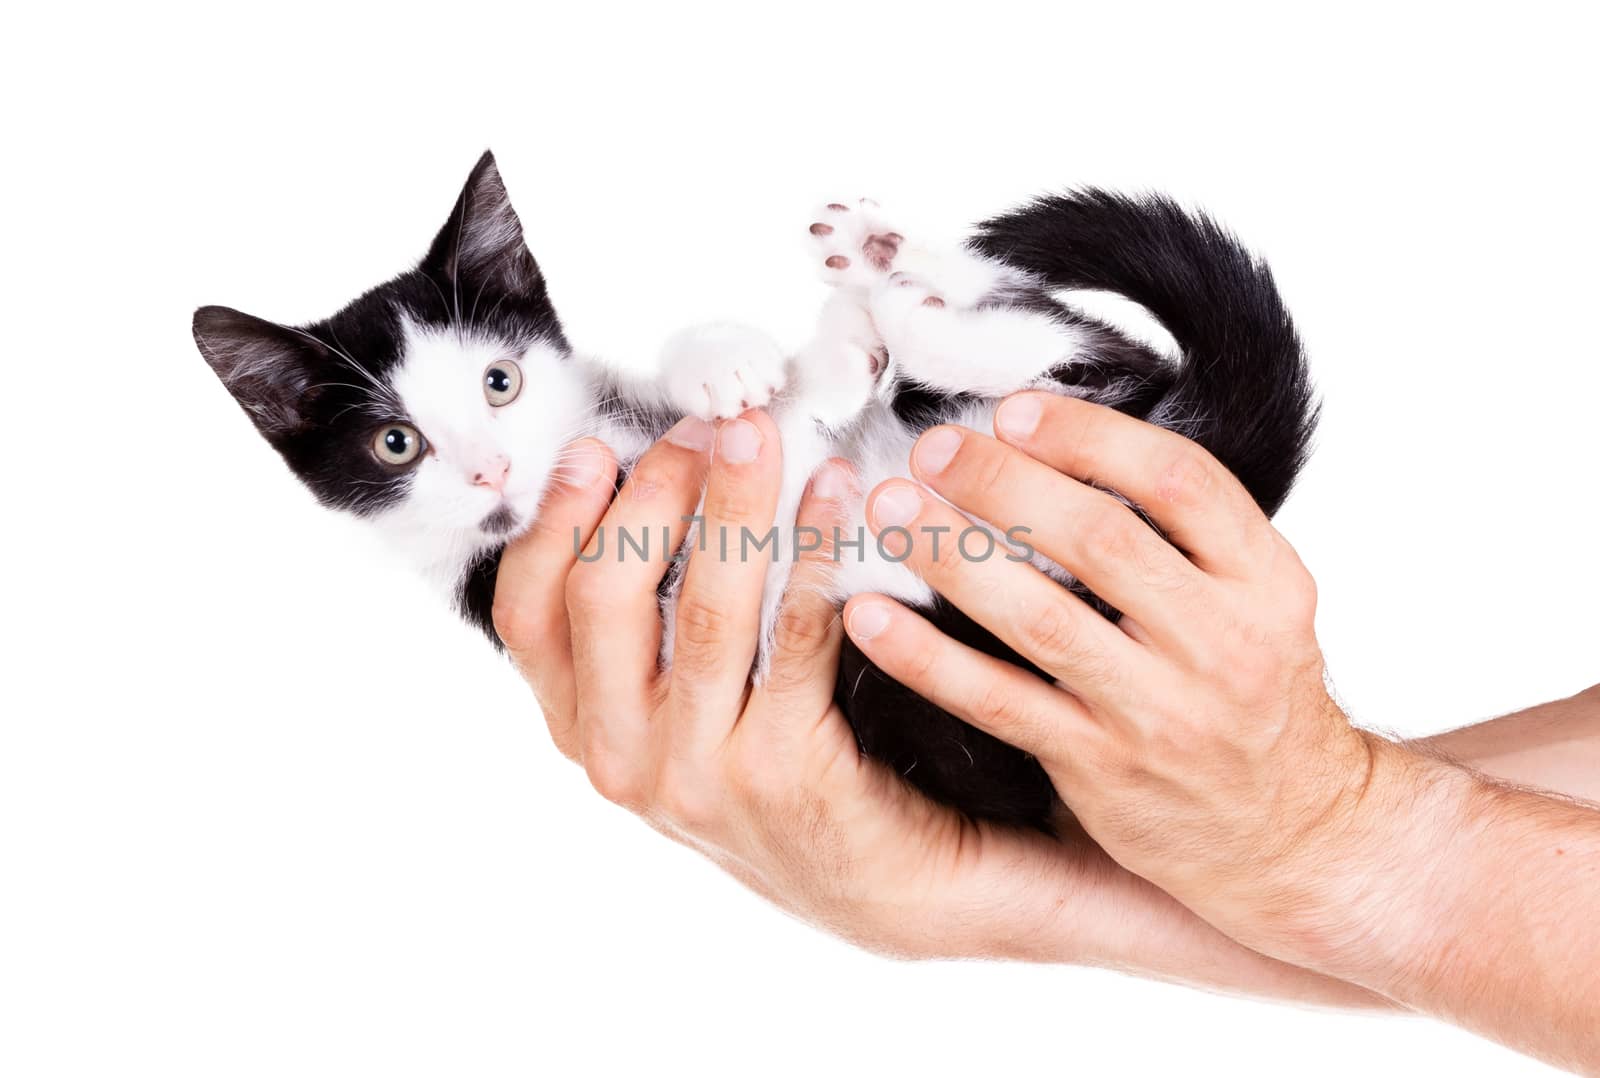 Black and white kitten in the hands of an adult man by michaklootwijk